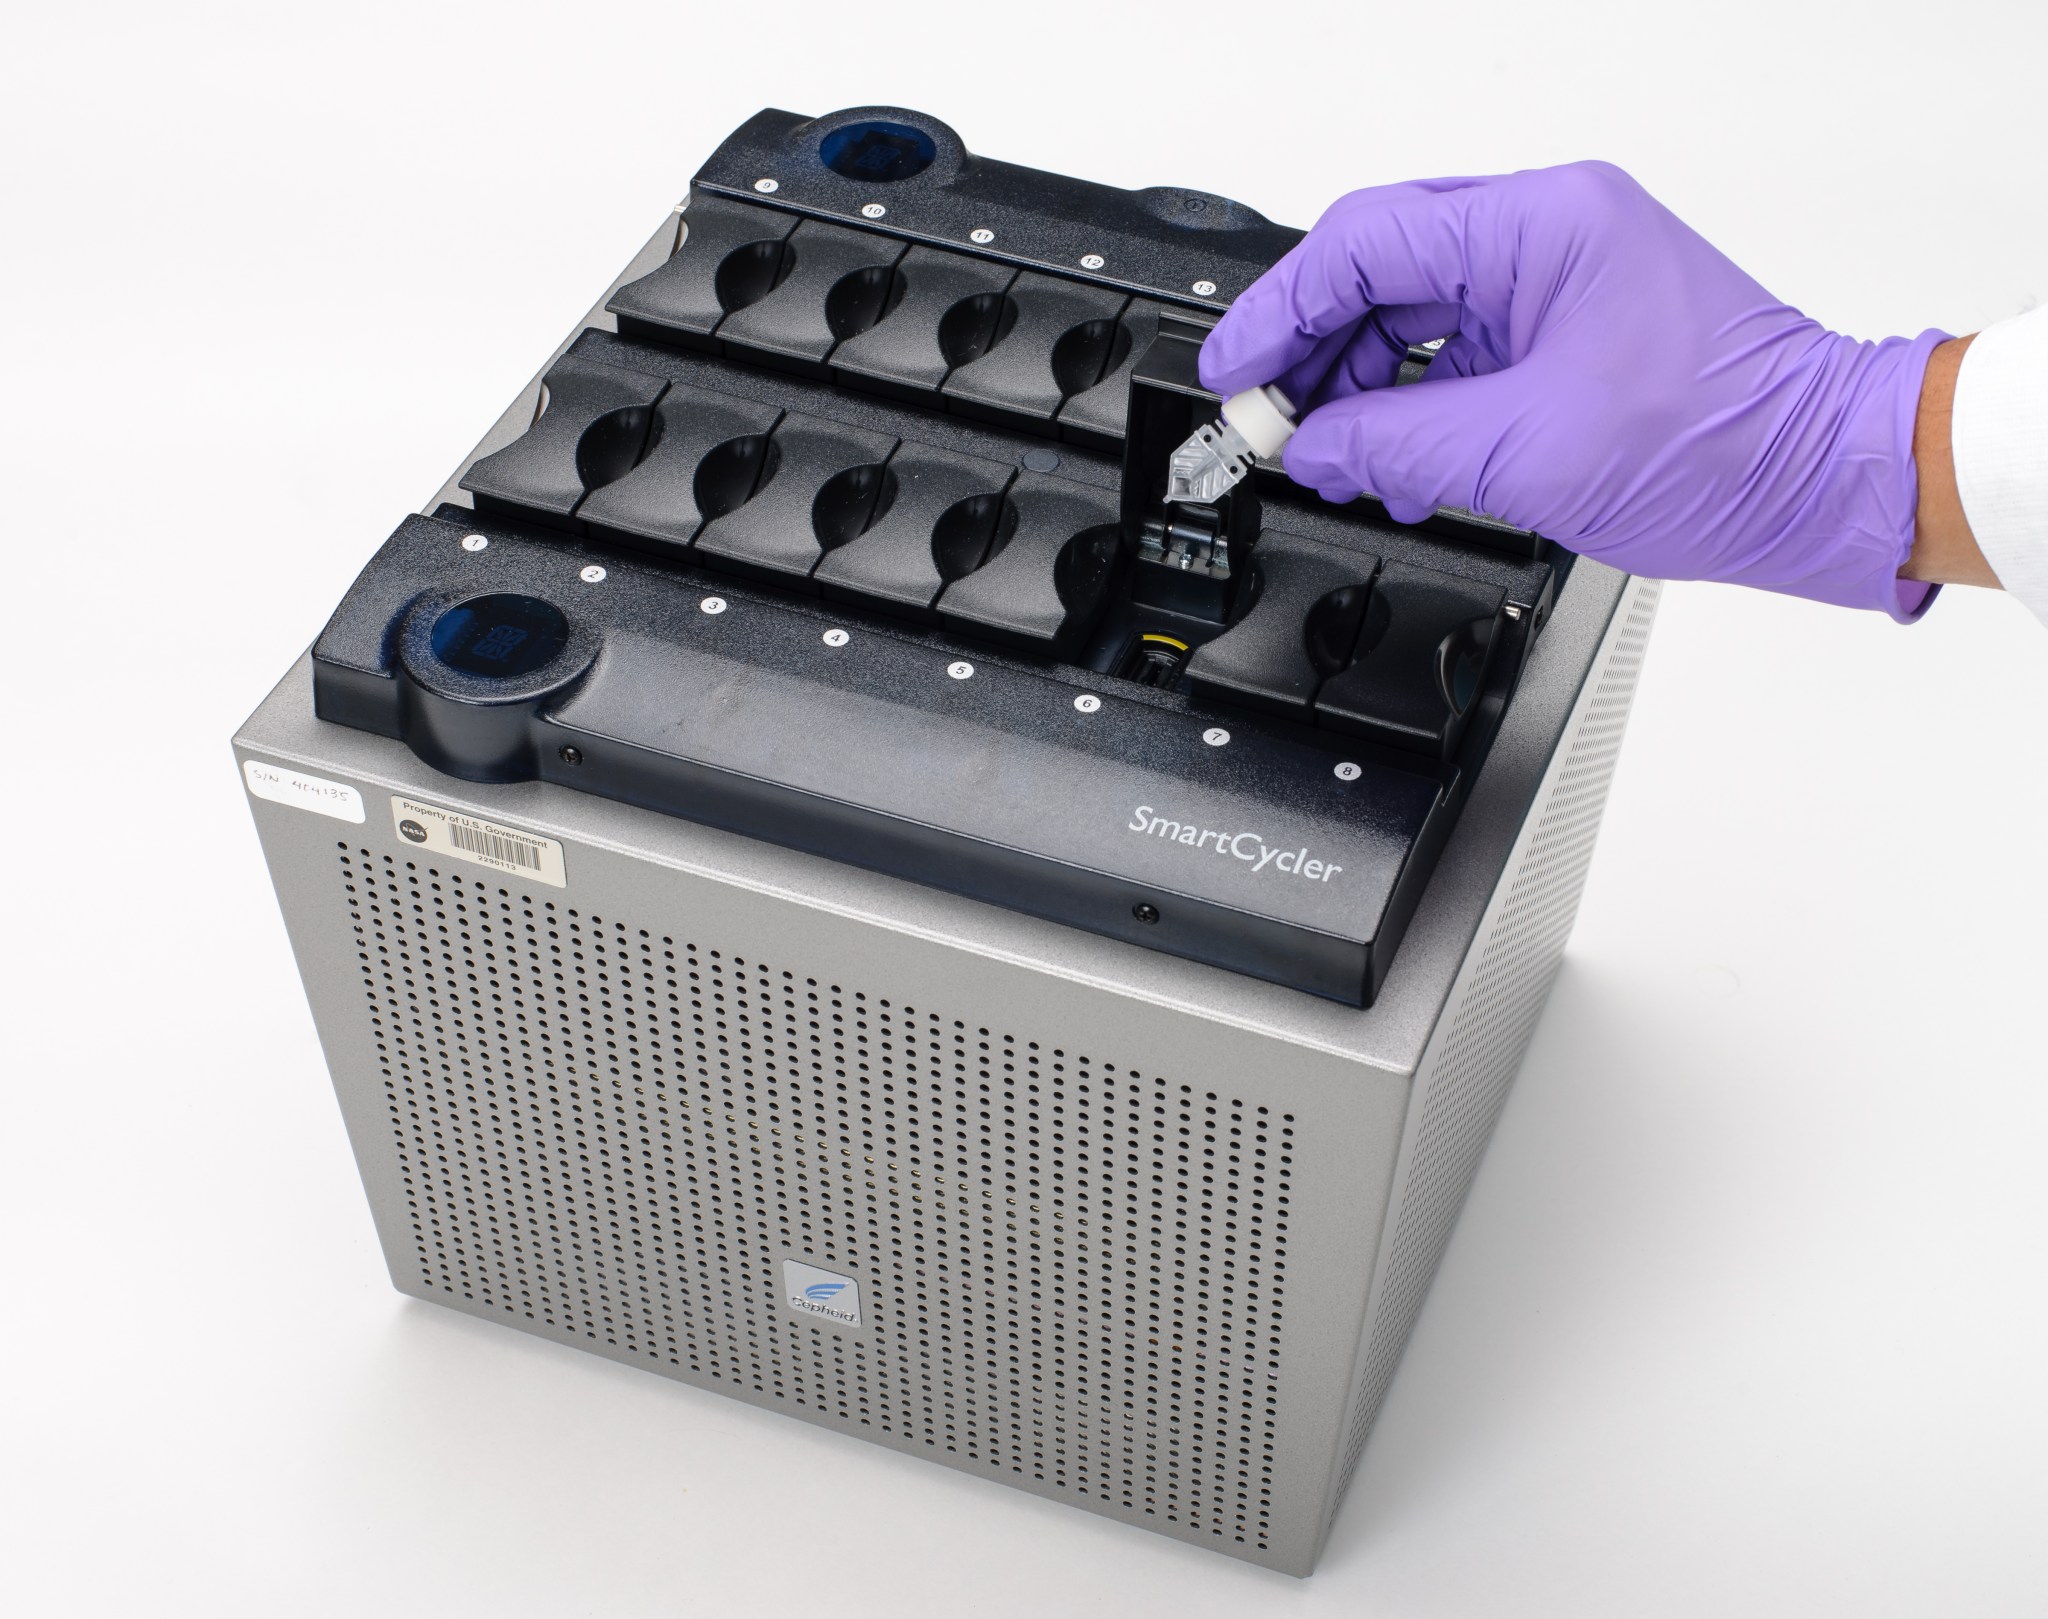 The Wetlab-2 system includes a Cepheid SmartCycler instrument that can perform up to 16 PCR reactions in parallel.